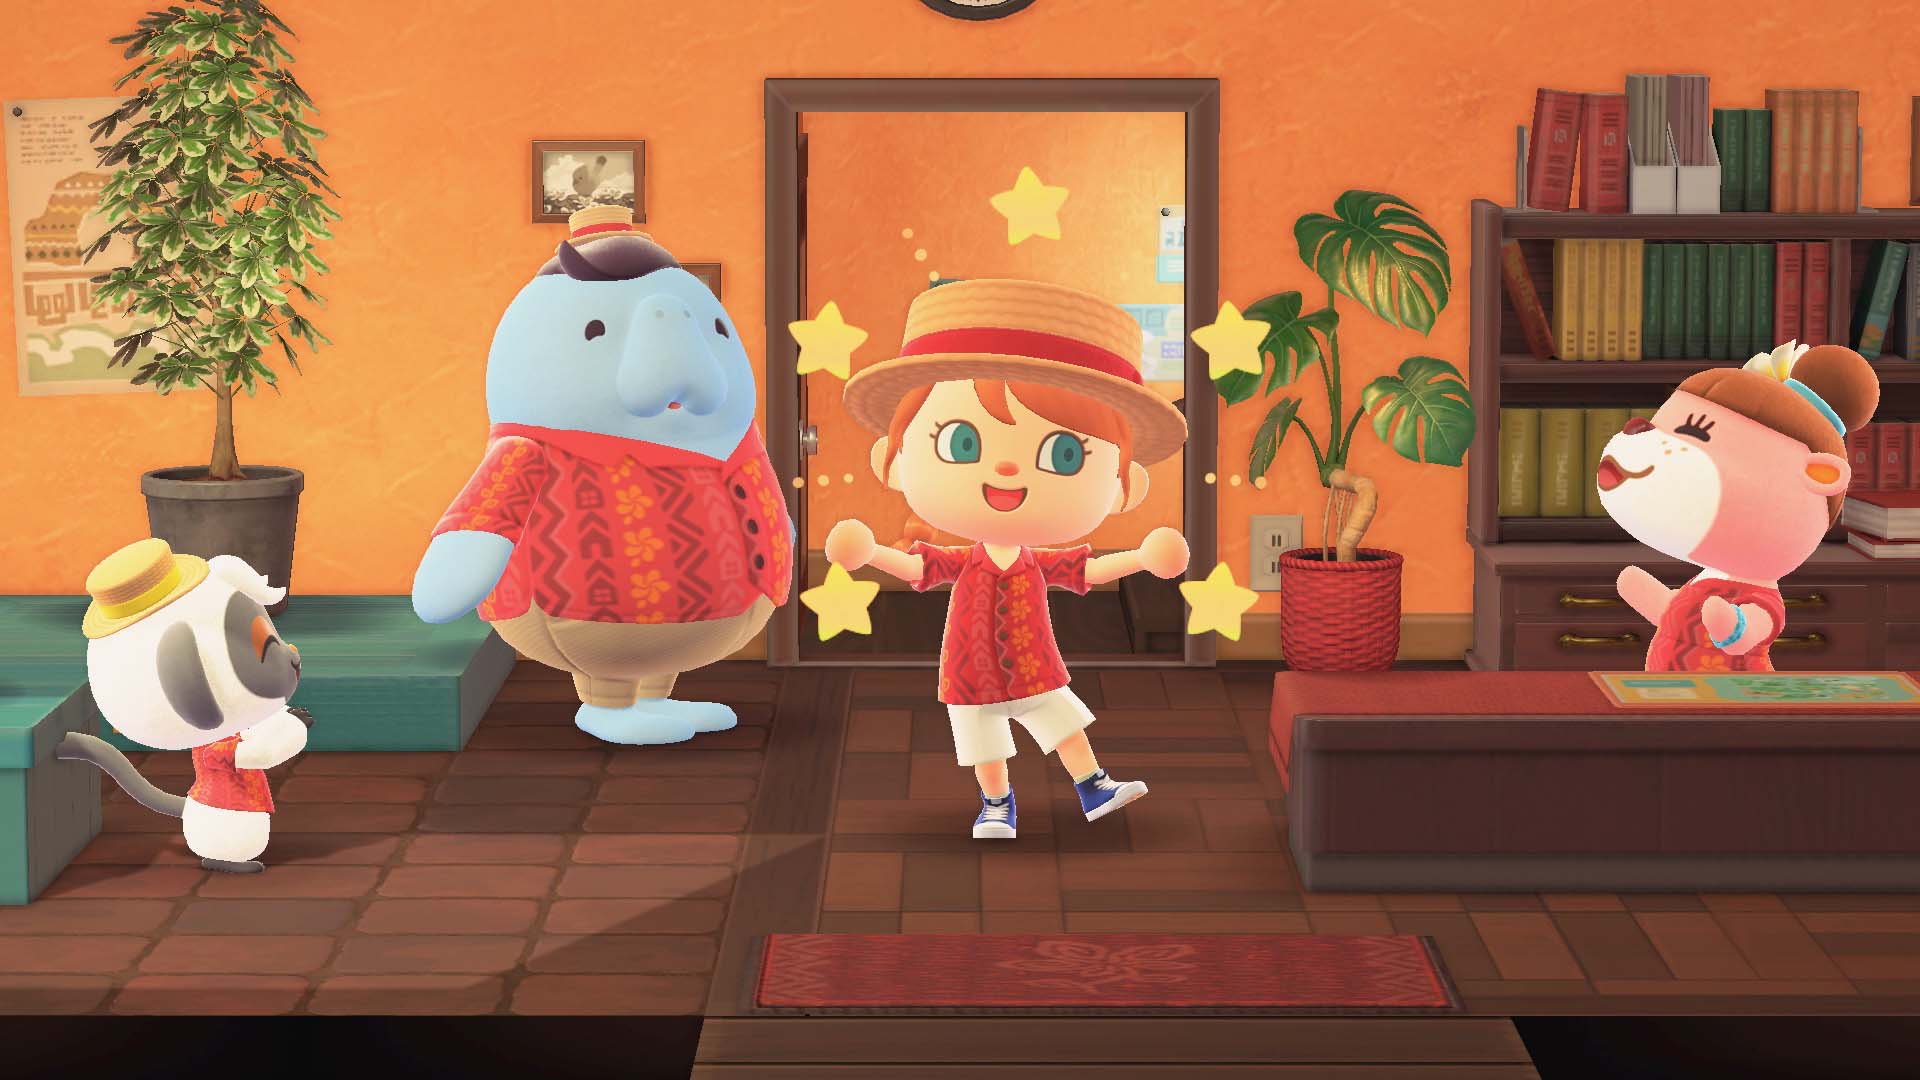 10 things to know about Animal Crossing's Happy Home Paradise expansion

